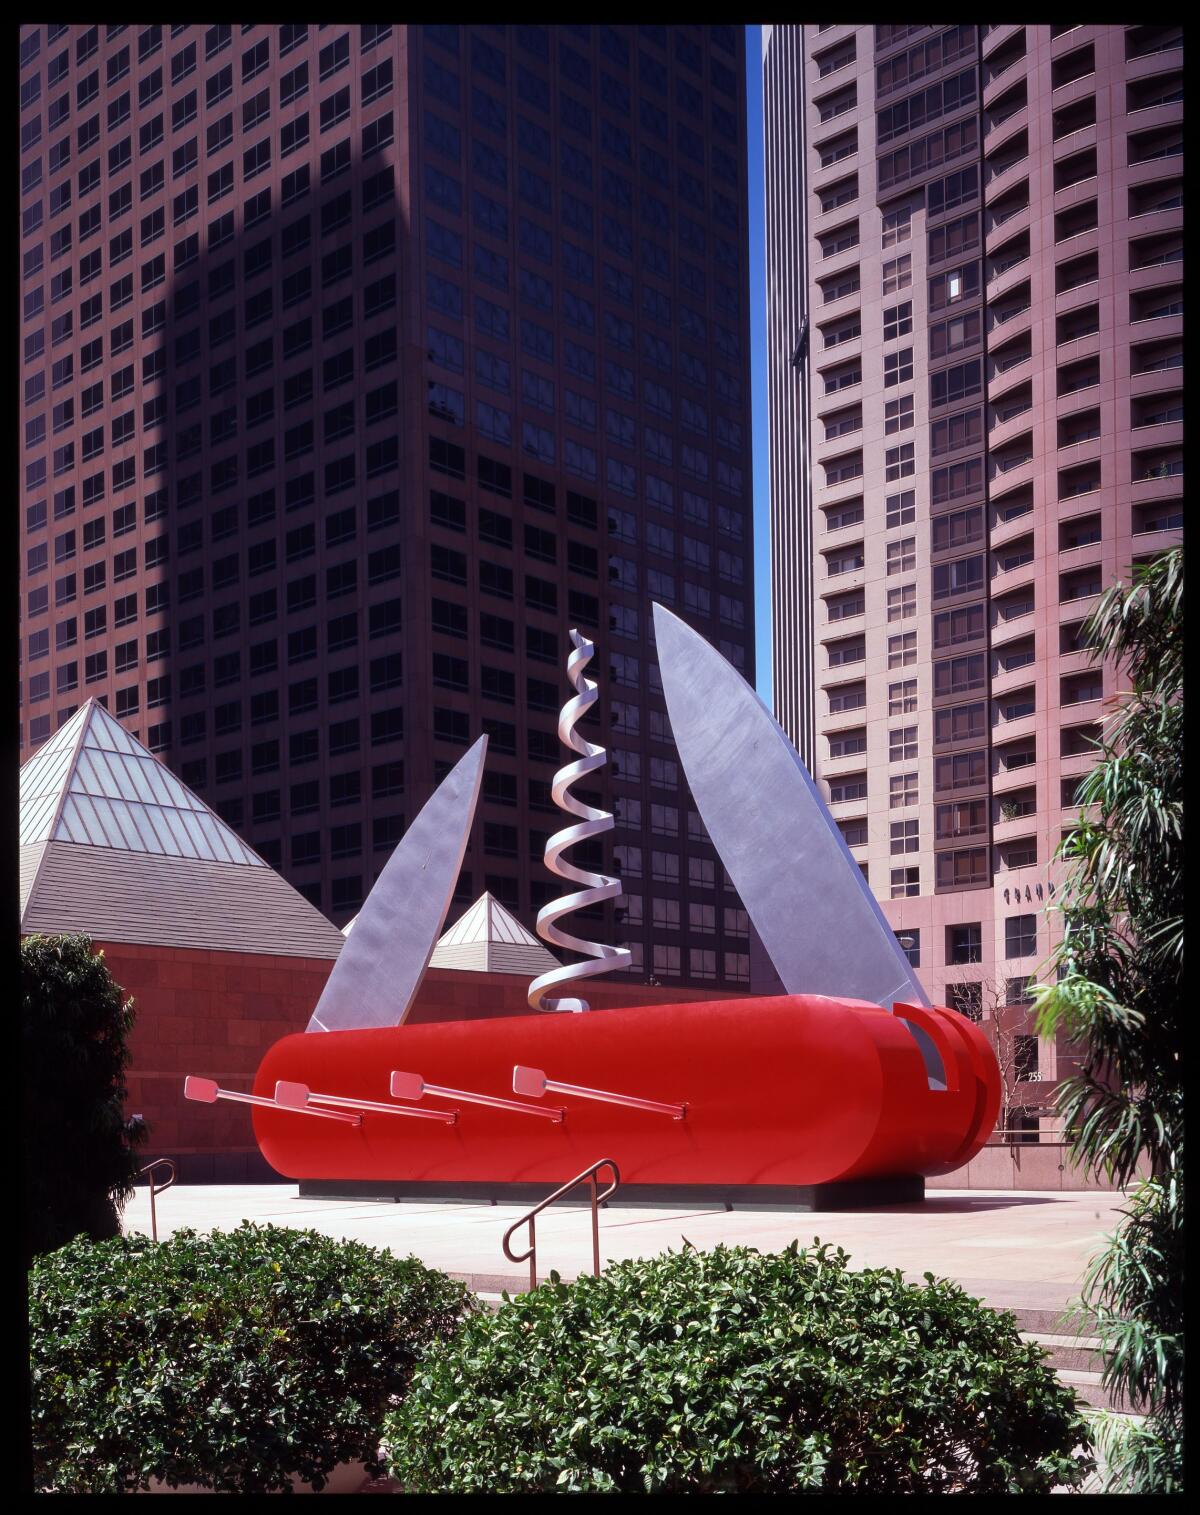 A sculpture resembling a boat made from a Swiss army knife stands in a plaza.